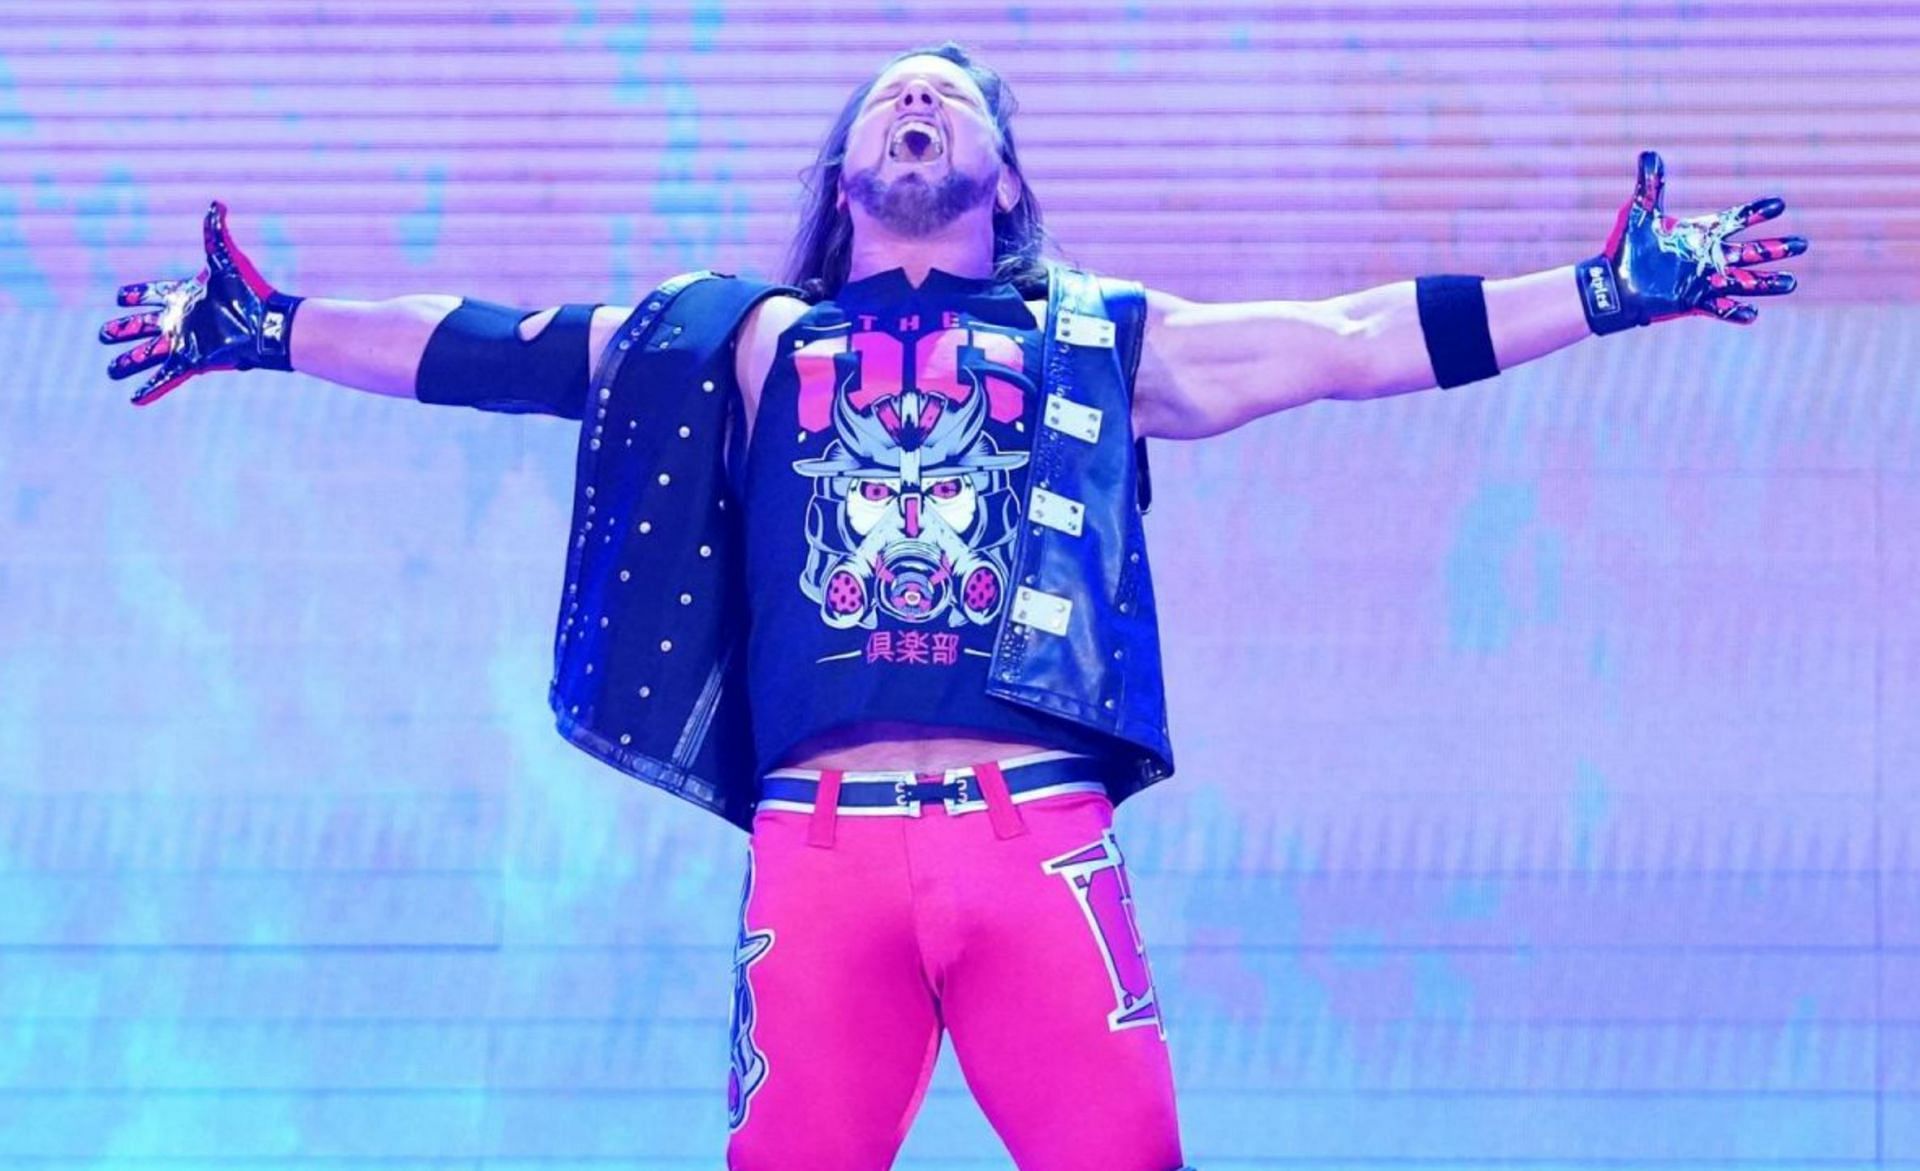 AJ Styles wants a WrestleMania match with Edge